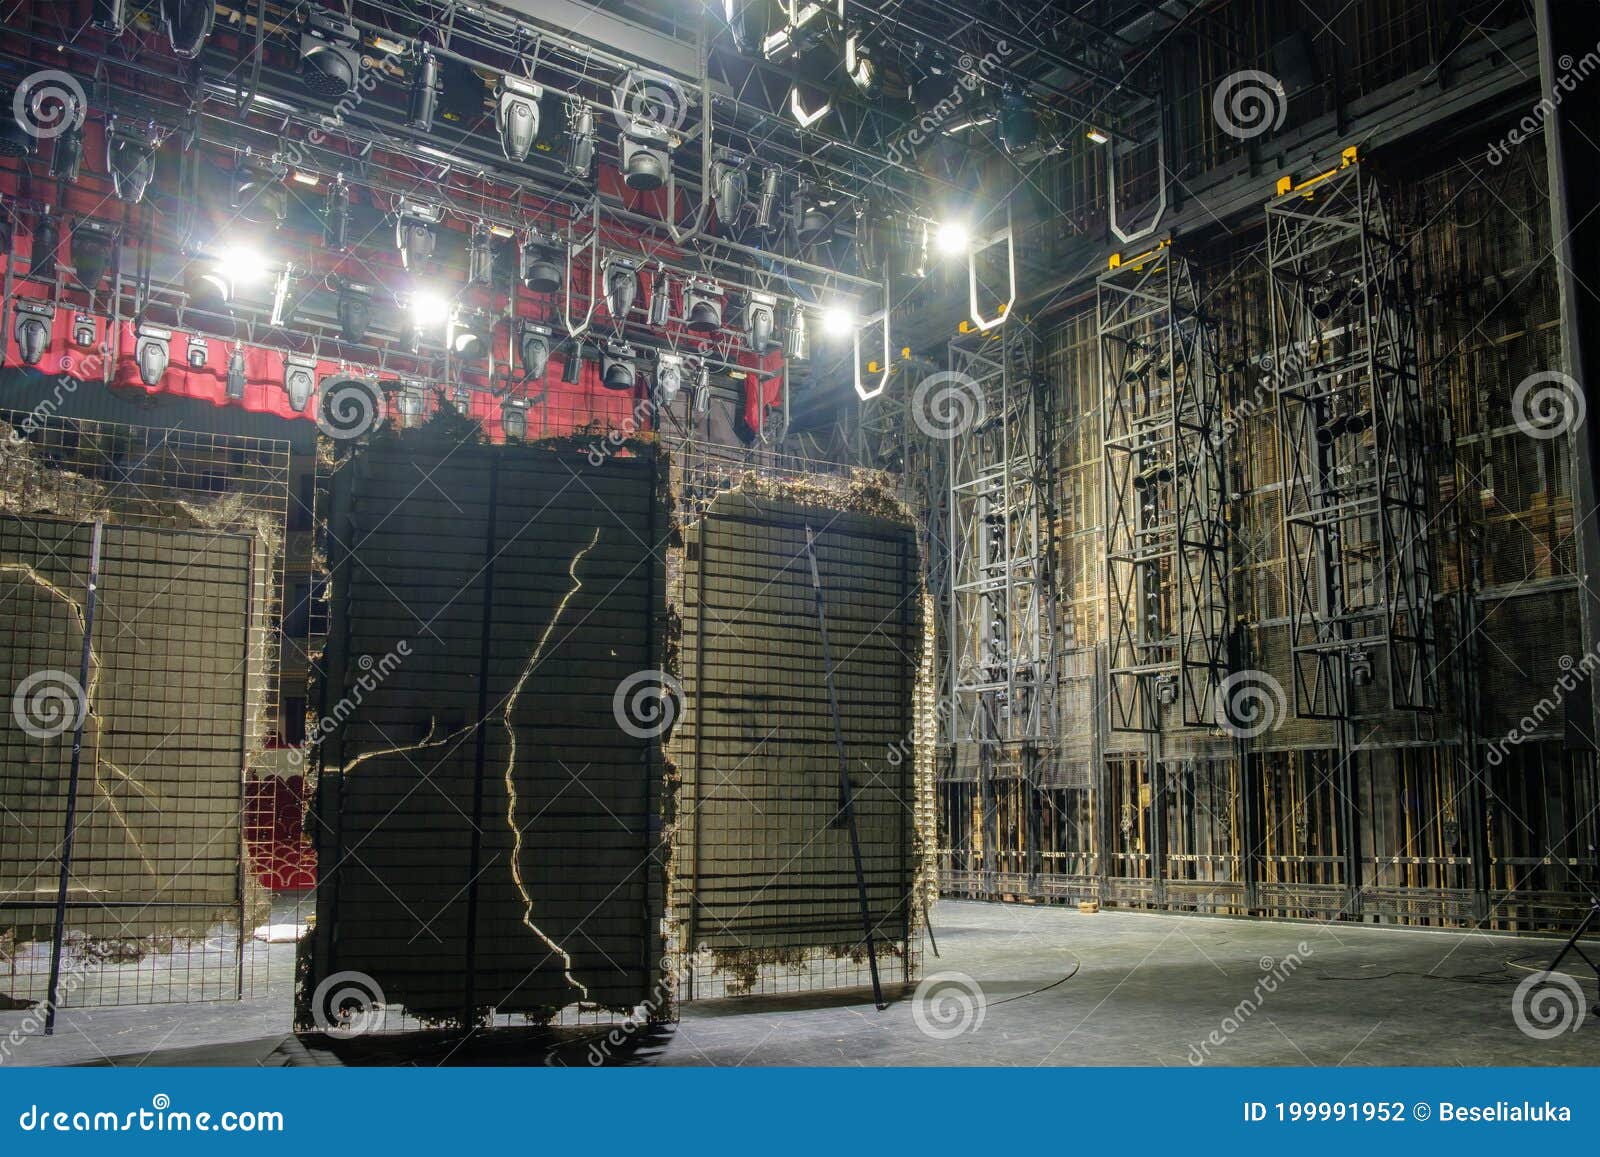 technical equipment at the backstage of theater